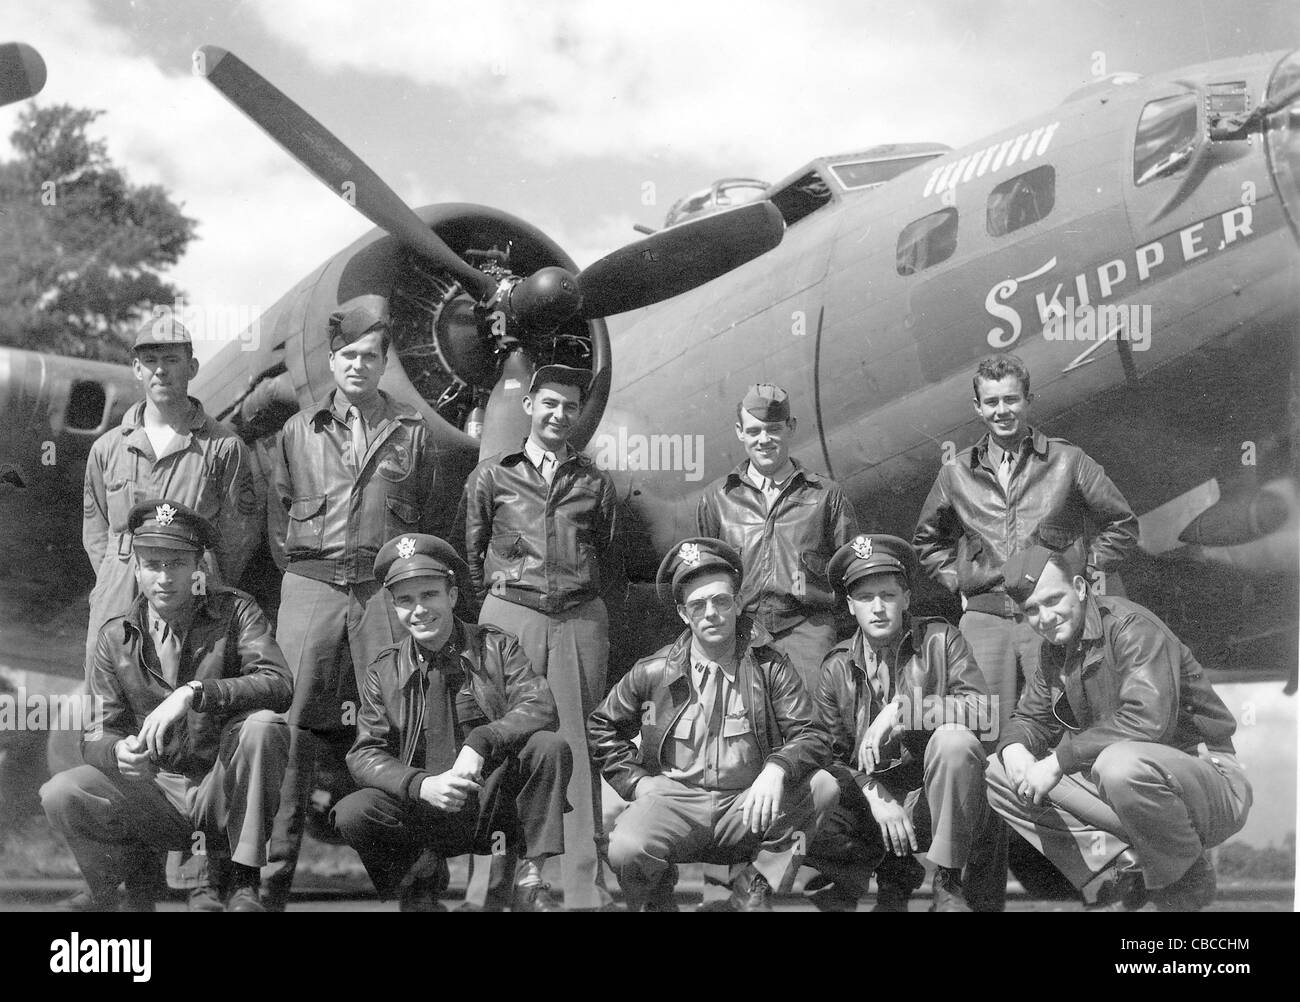 The USAAF crew of WW11 B17 Flying Fortress pose by the nose of their aircraft Skipper. Stock Photo